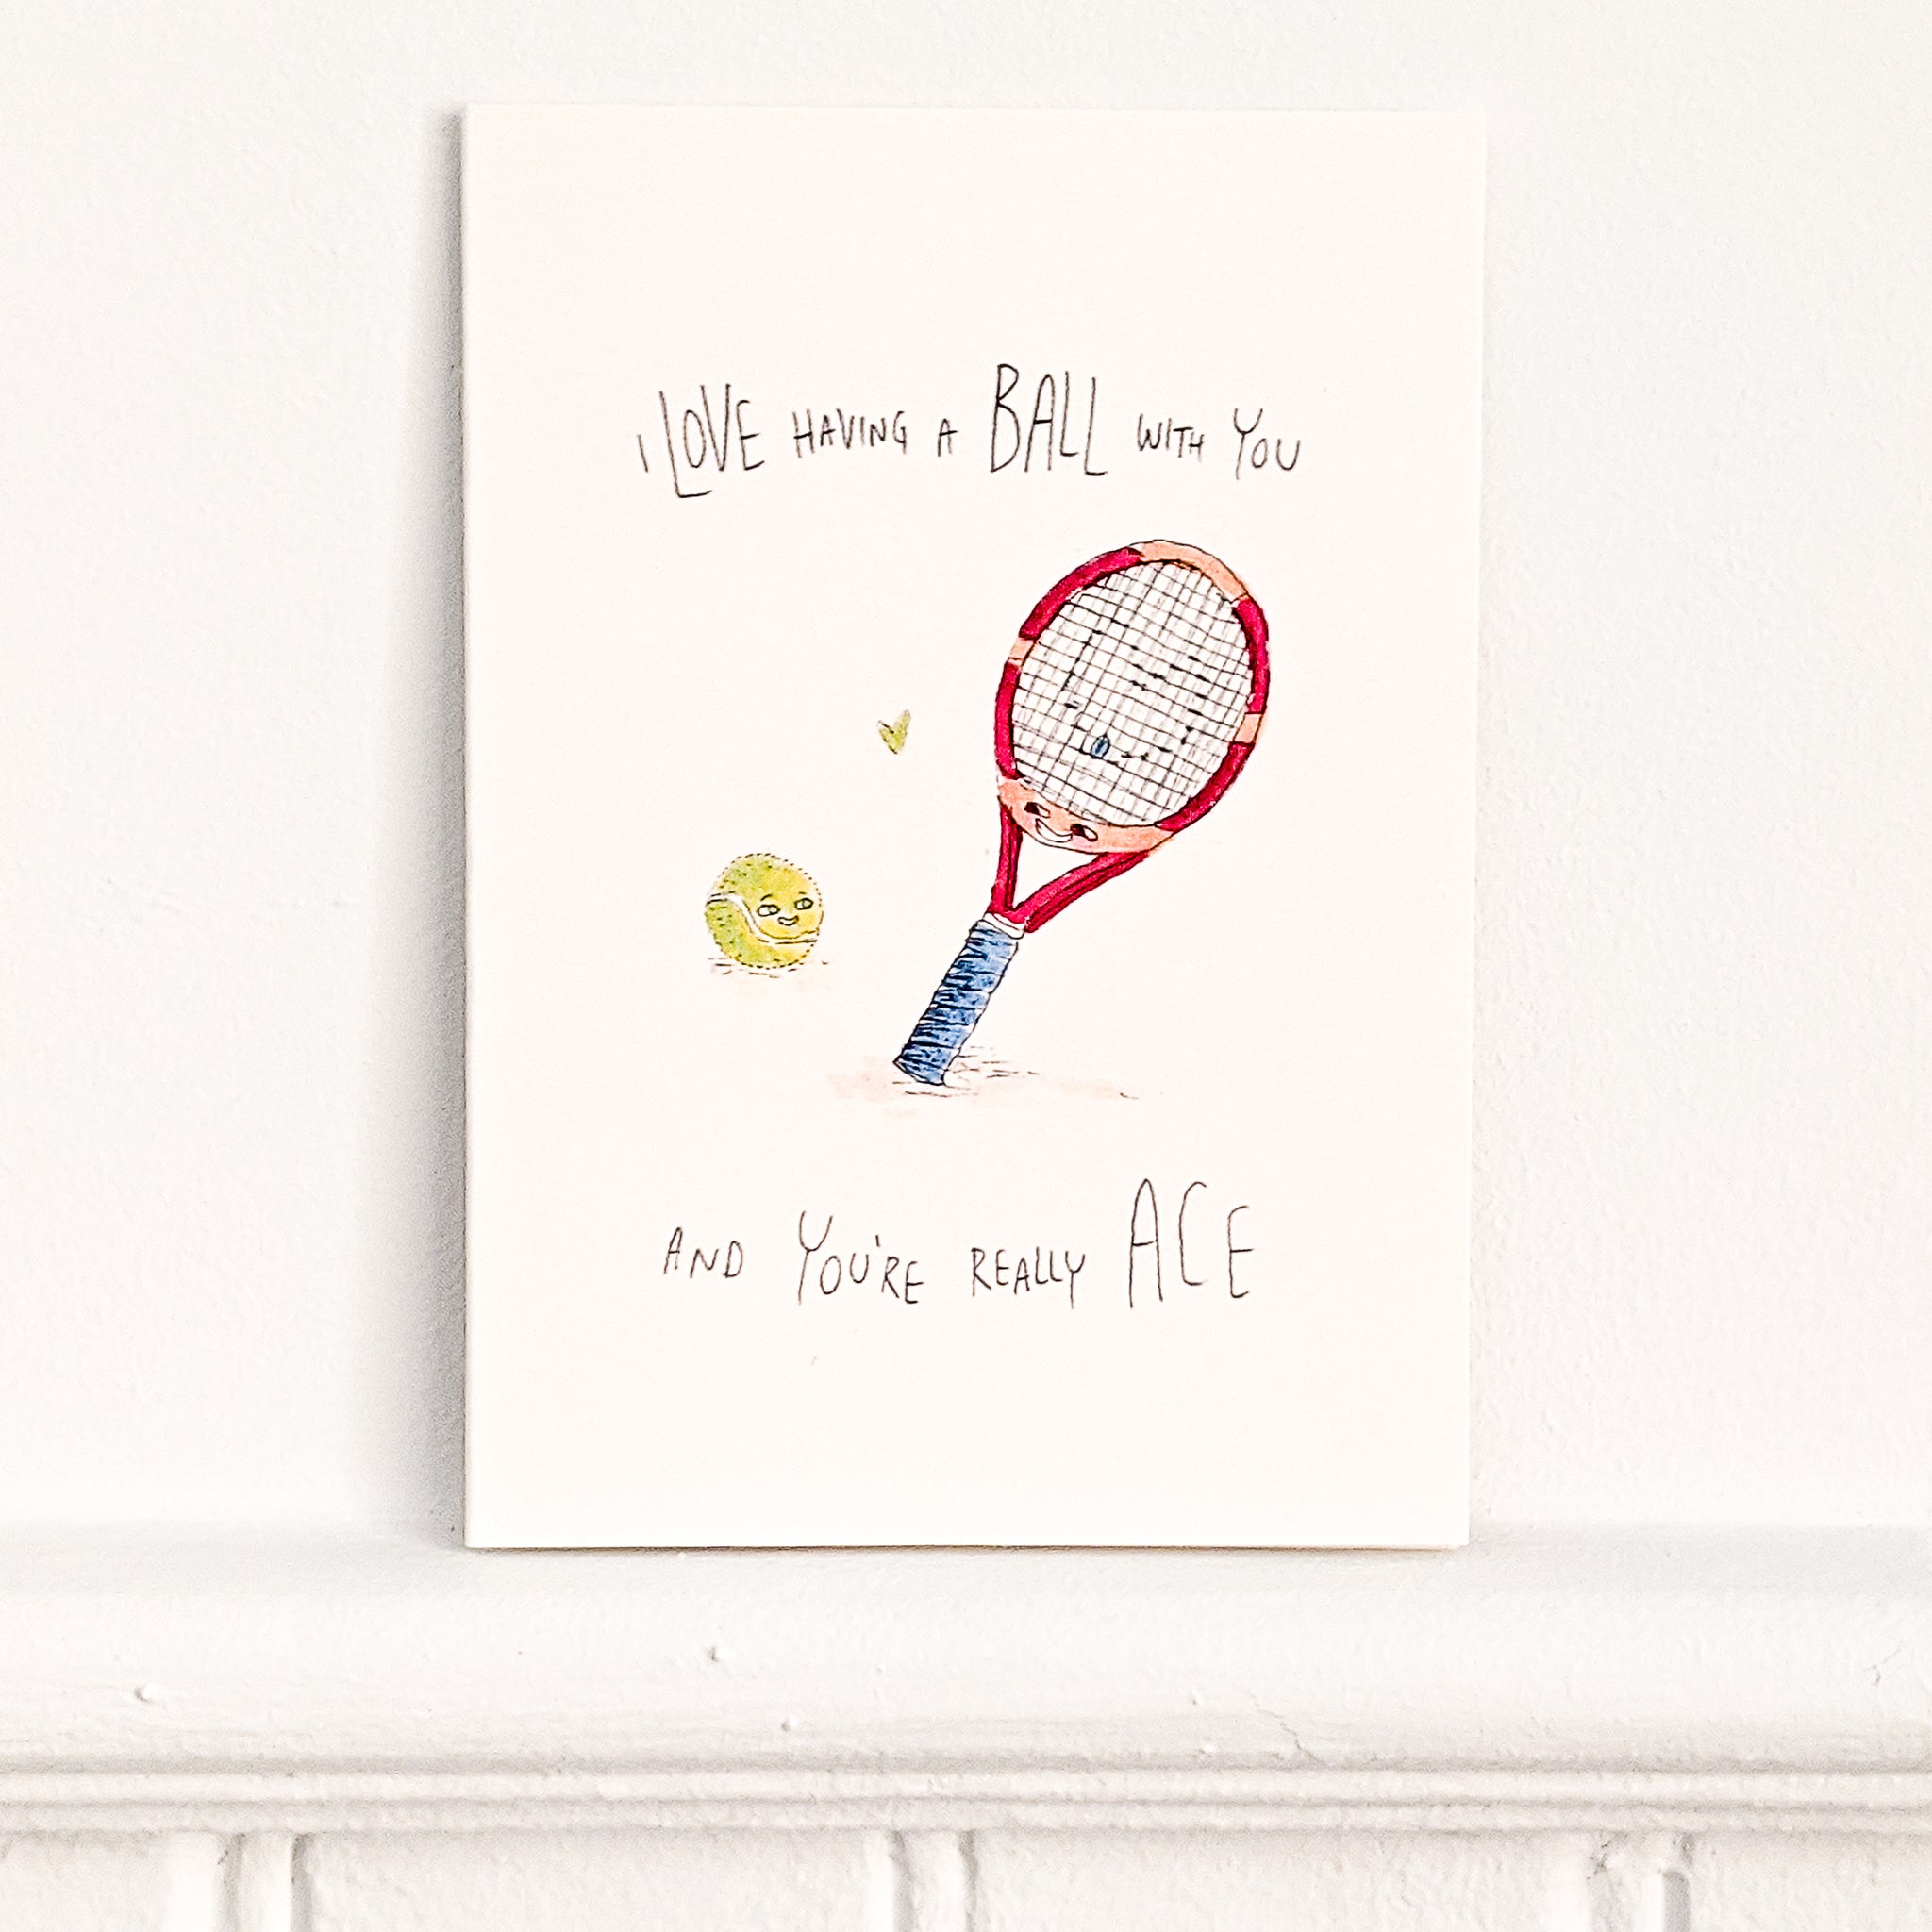 I Love Having a Ball with You and I Think You're Really Ace | lovely card | hand-made card